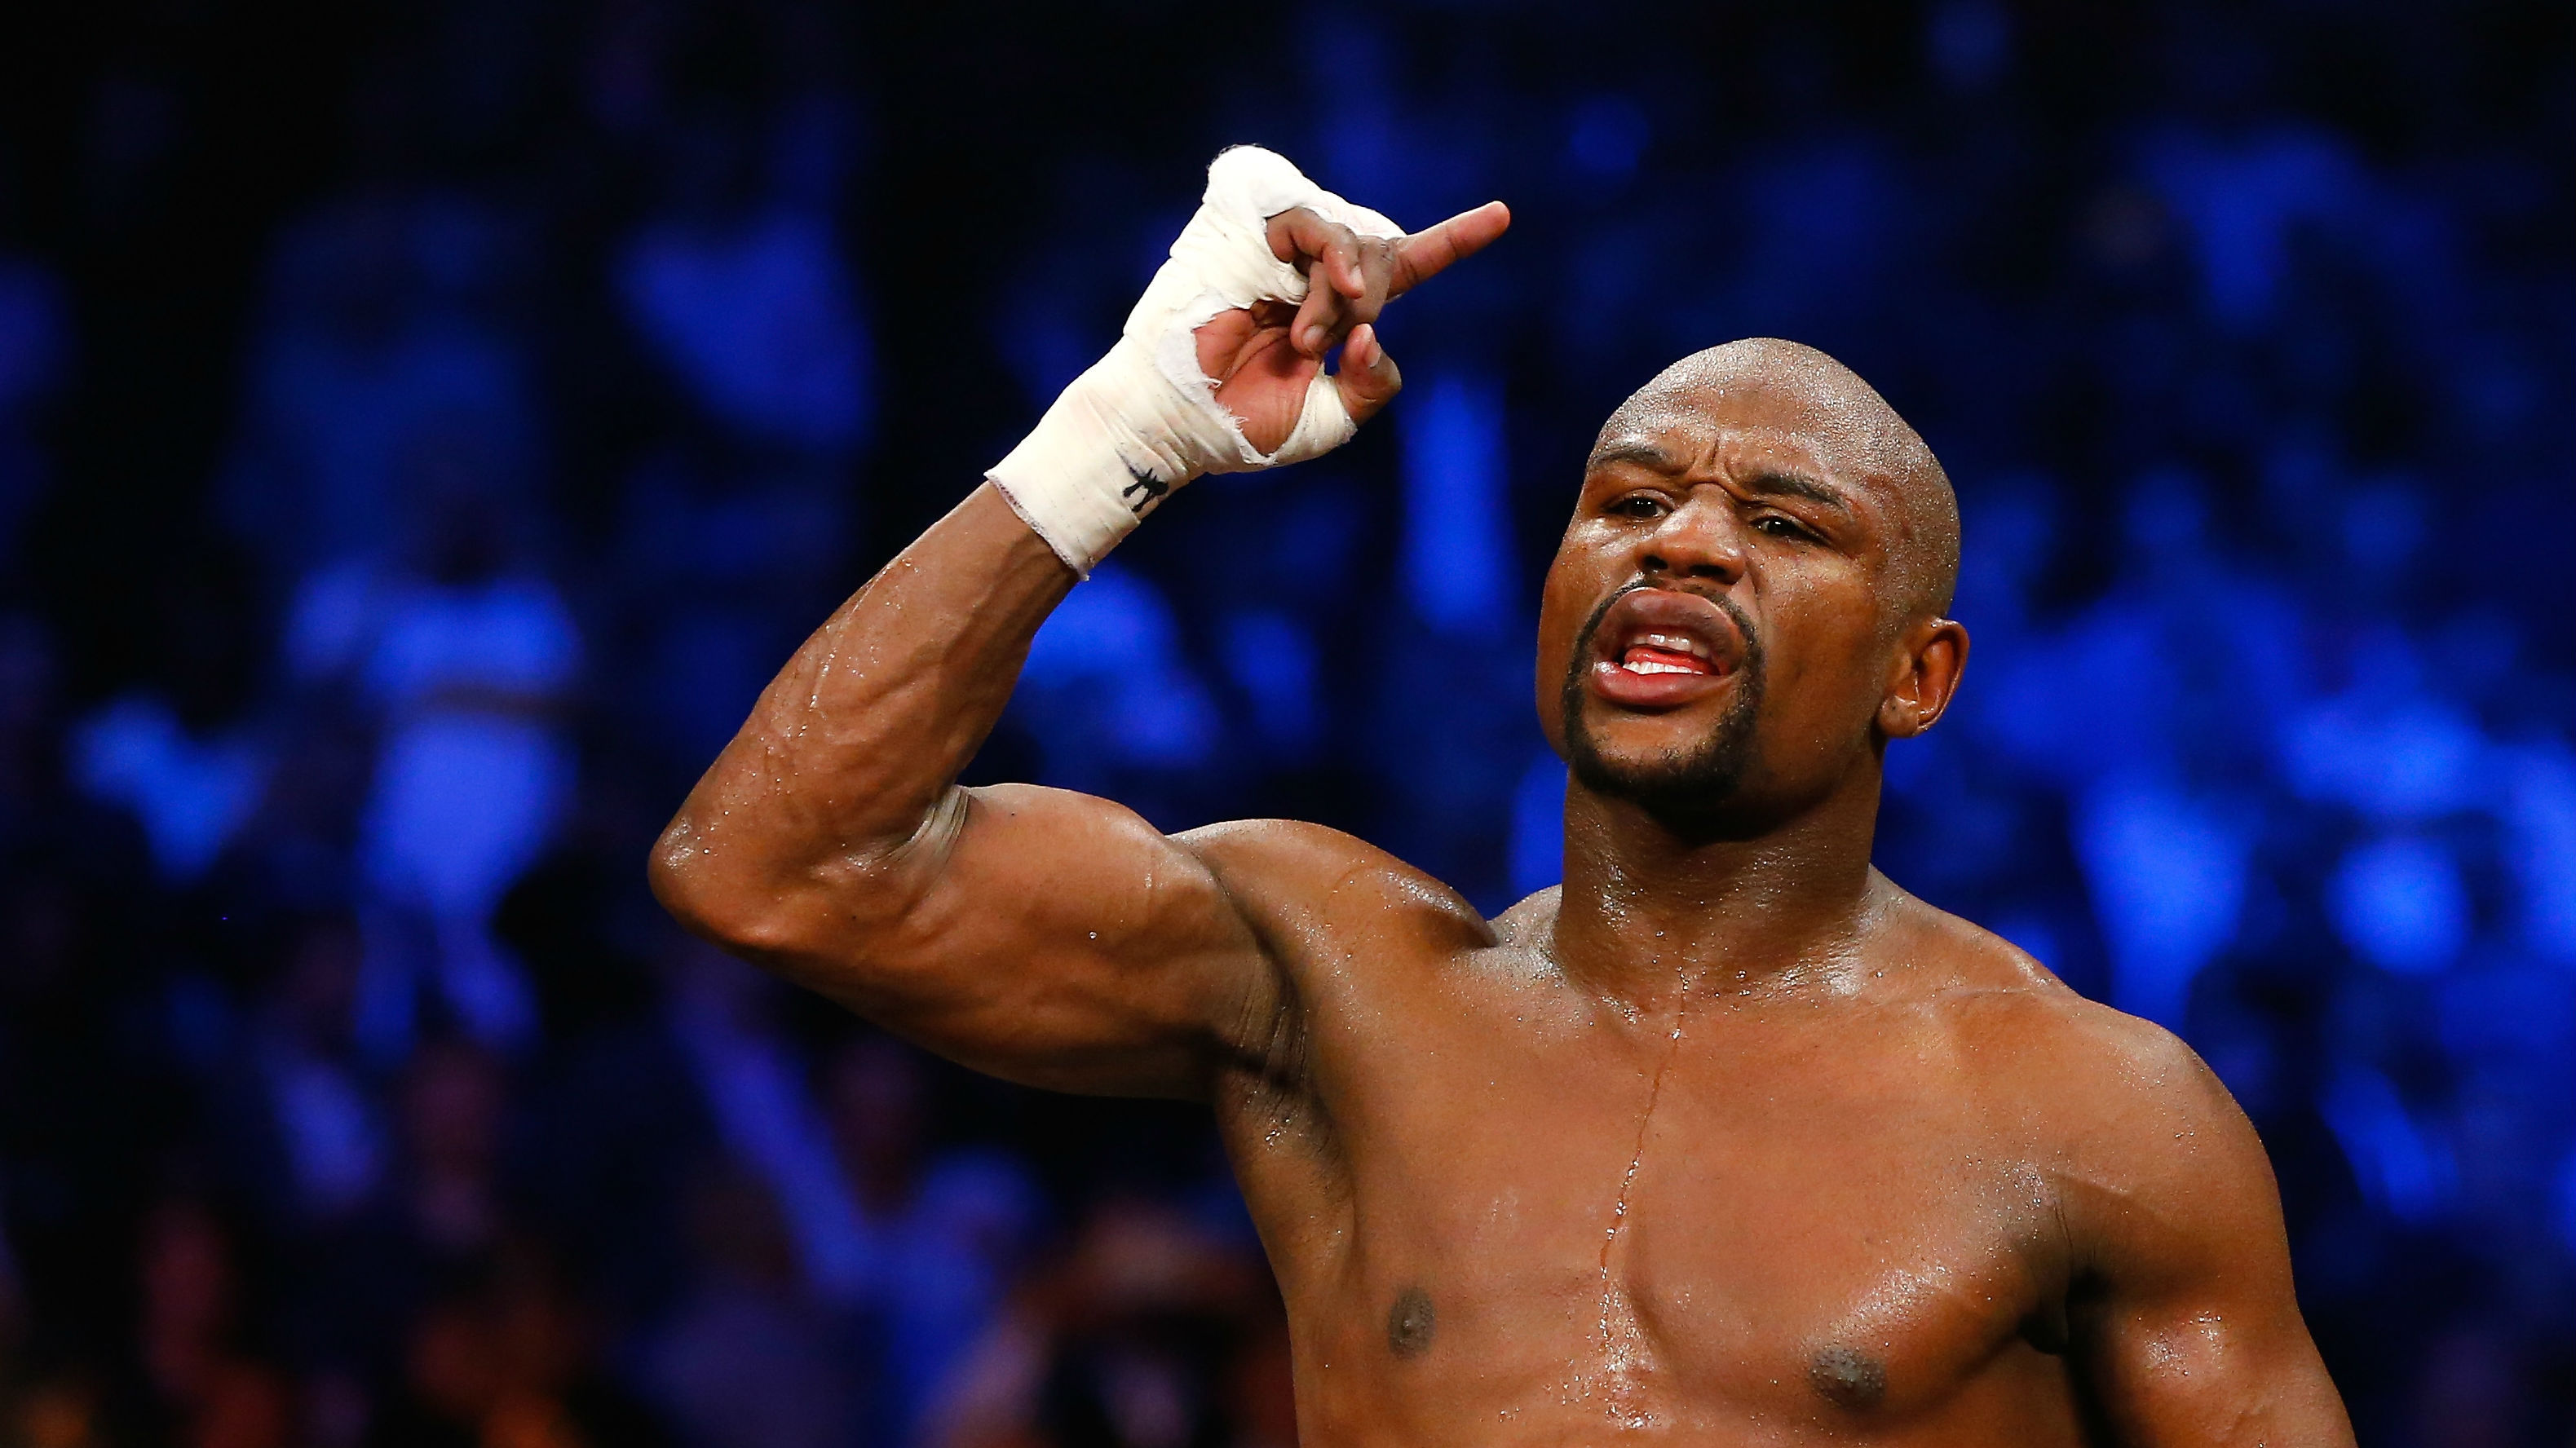 Floyd Mayweather Jr Wallpaper Image Photos Pictures Background